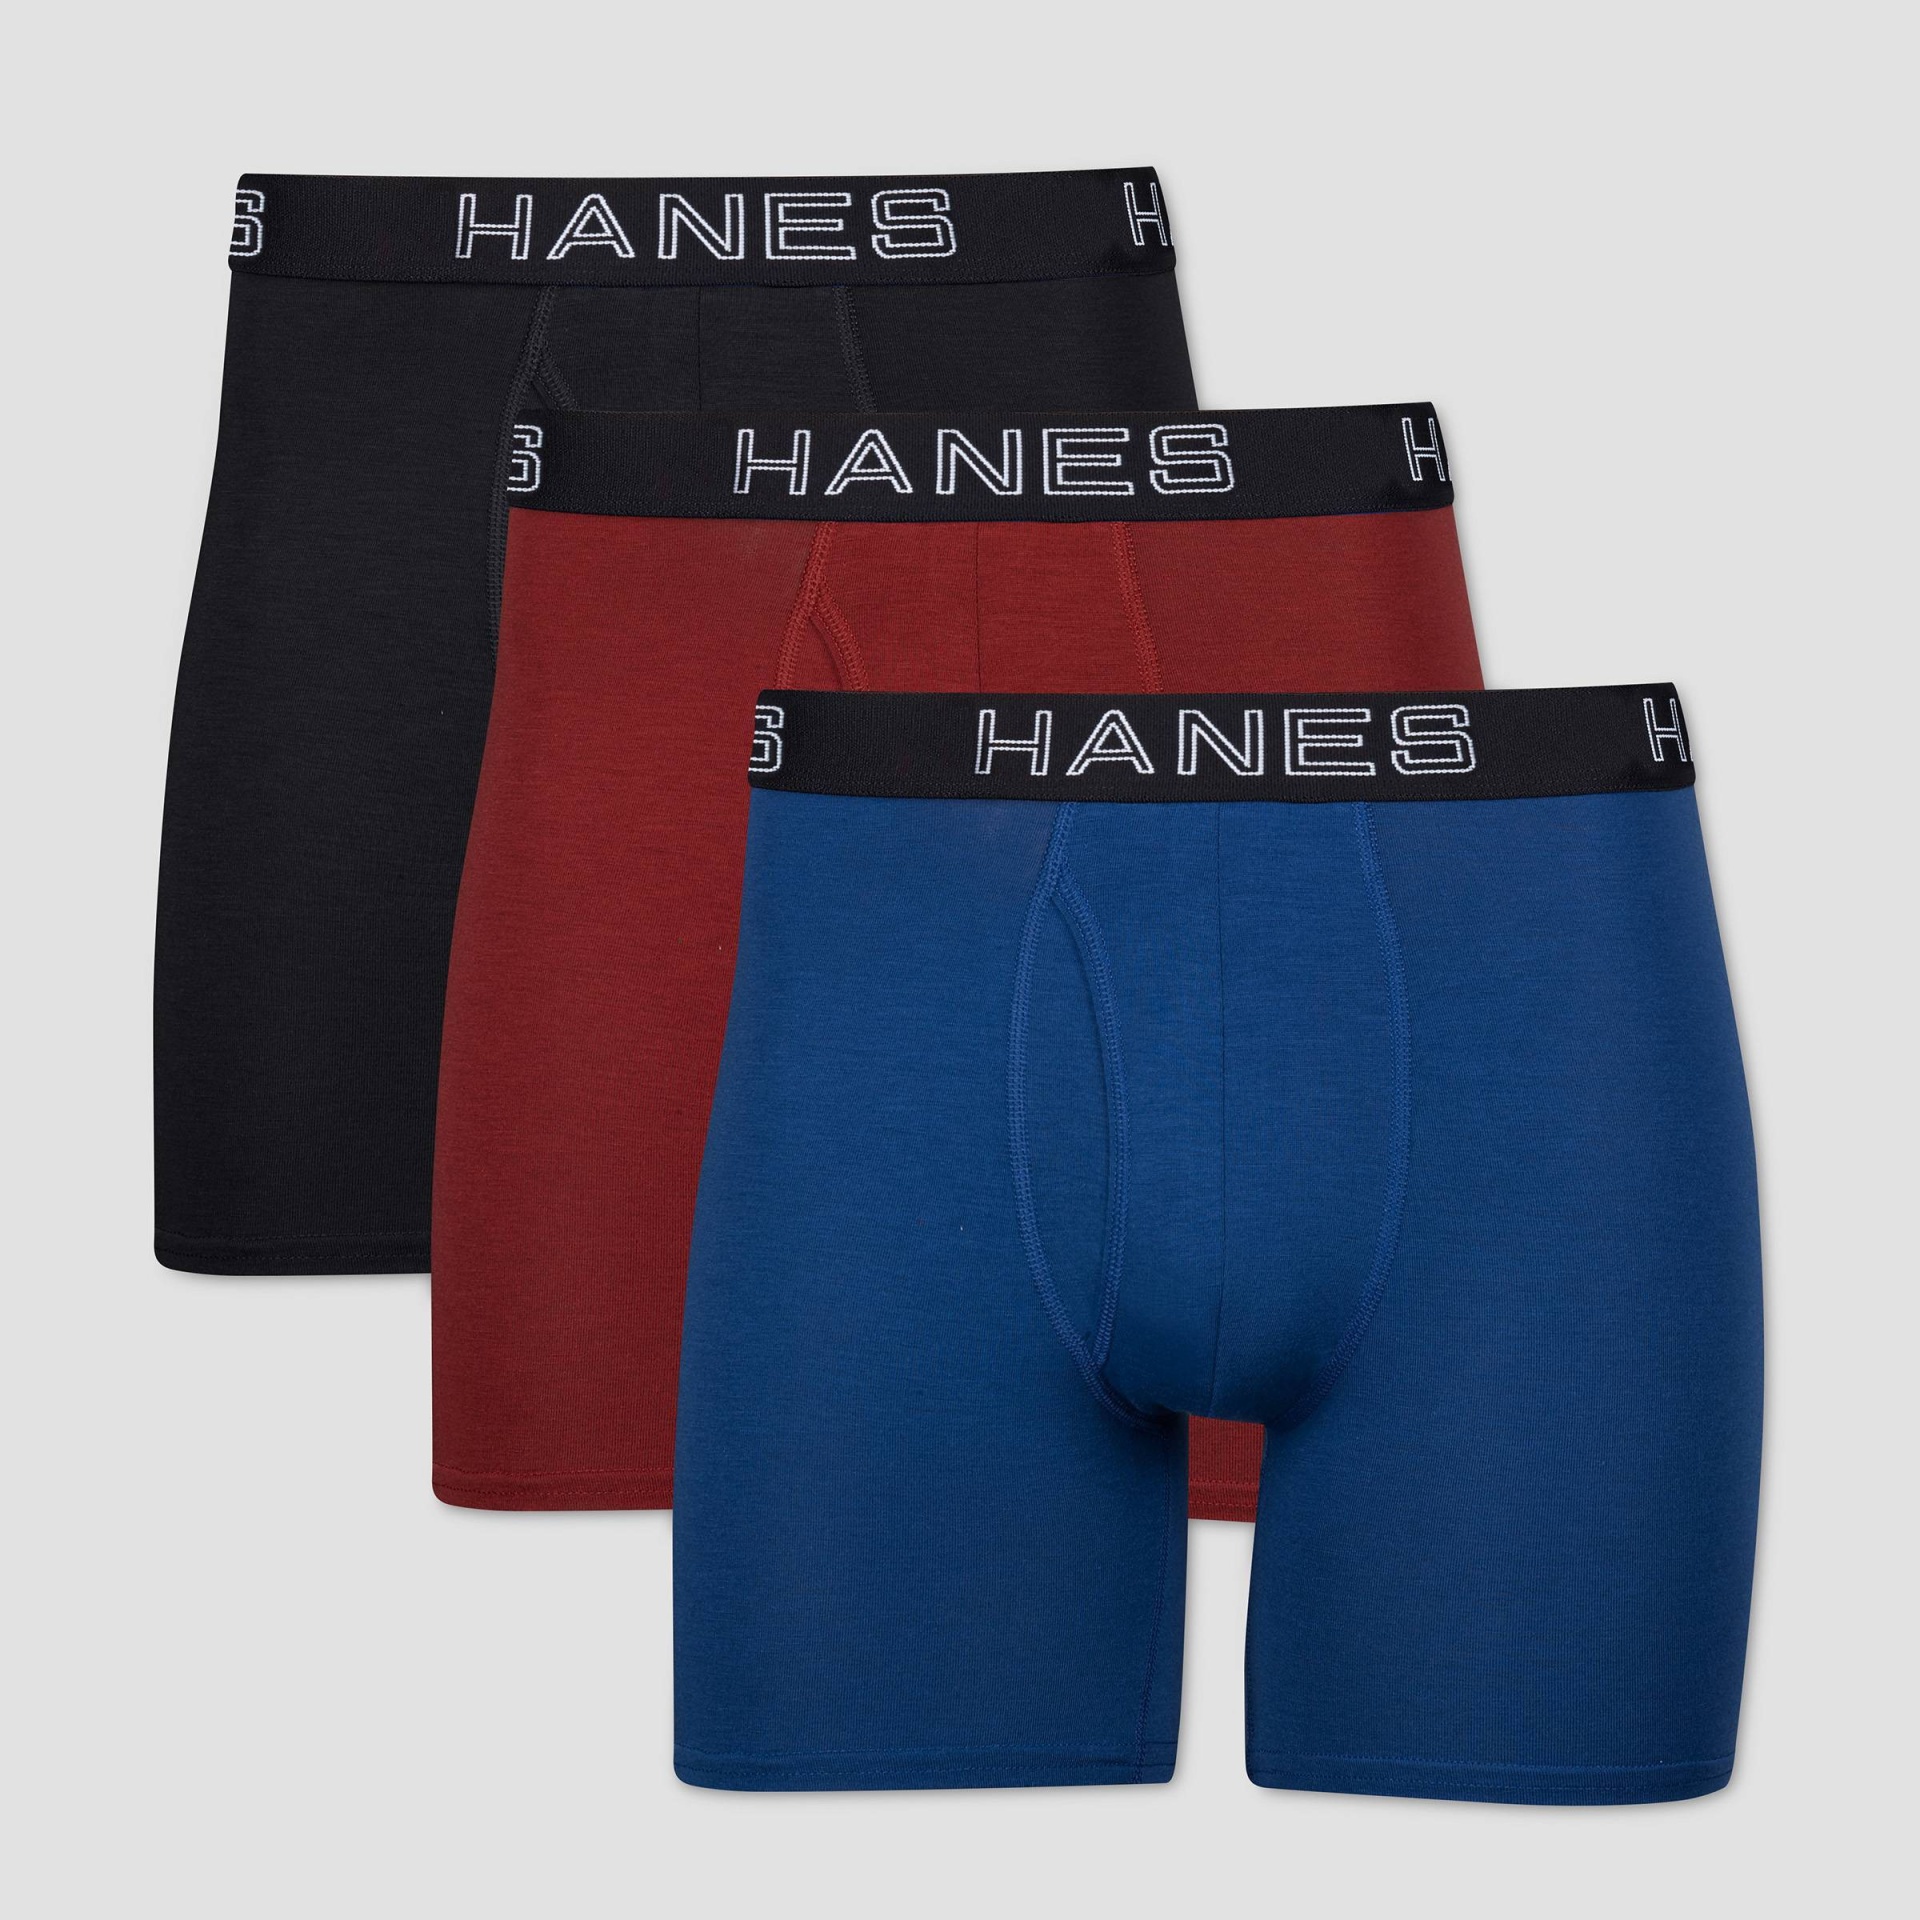 Hanes Premium Men's 3pk Boxer Briefs with Total Support Pouch - Color May  Vary S 3 ct